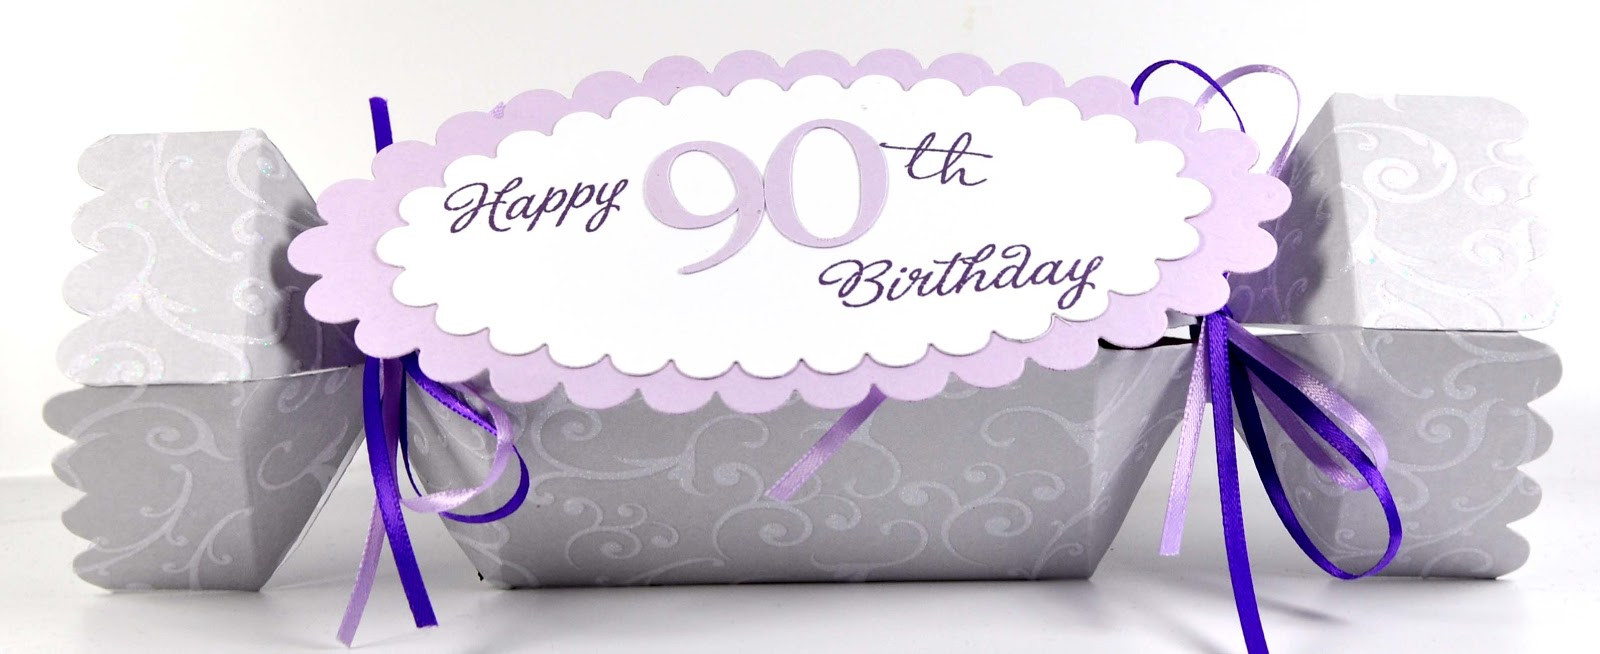 90th Birthday Party Favors
 Polka Dot Paperie 90th Birthday Party Favor